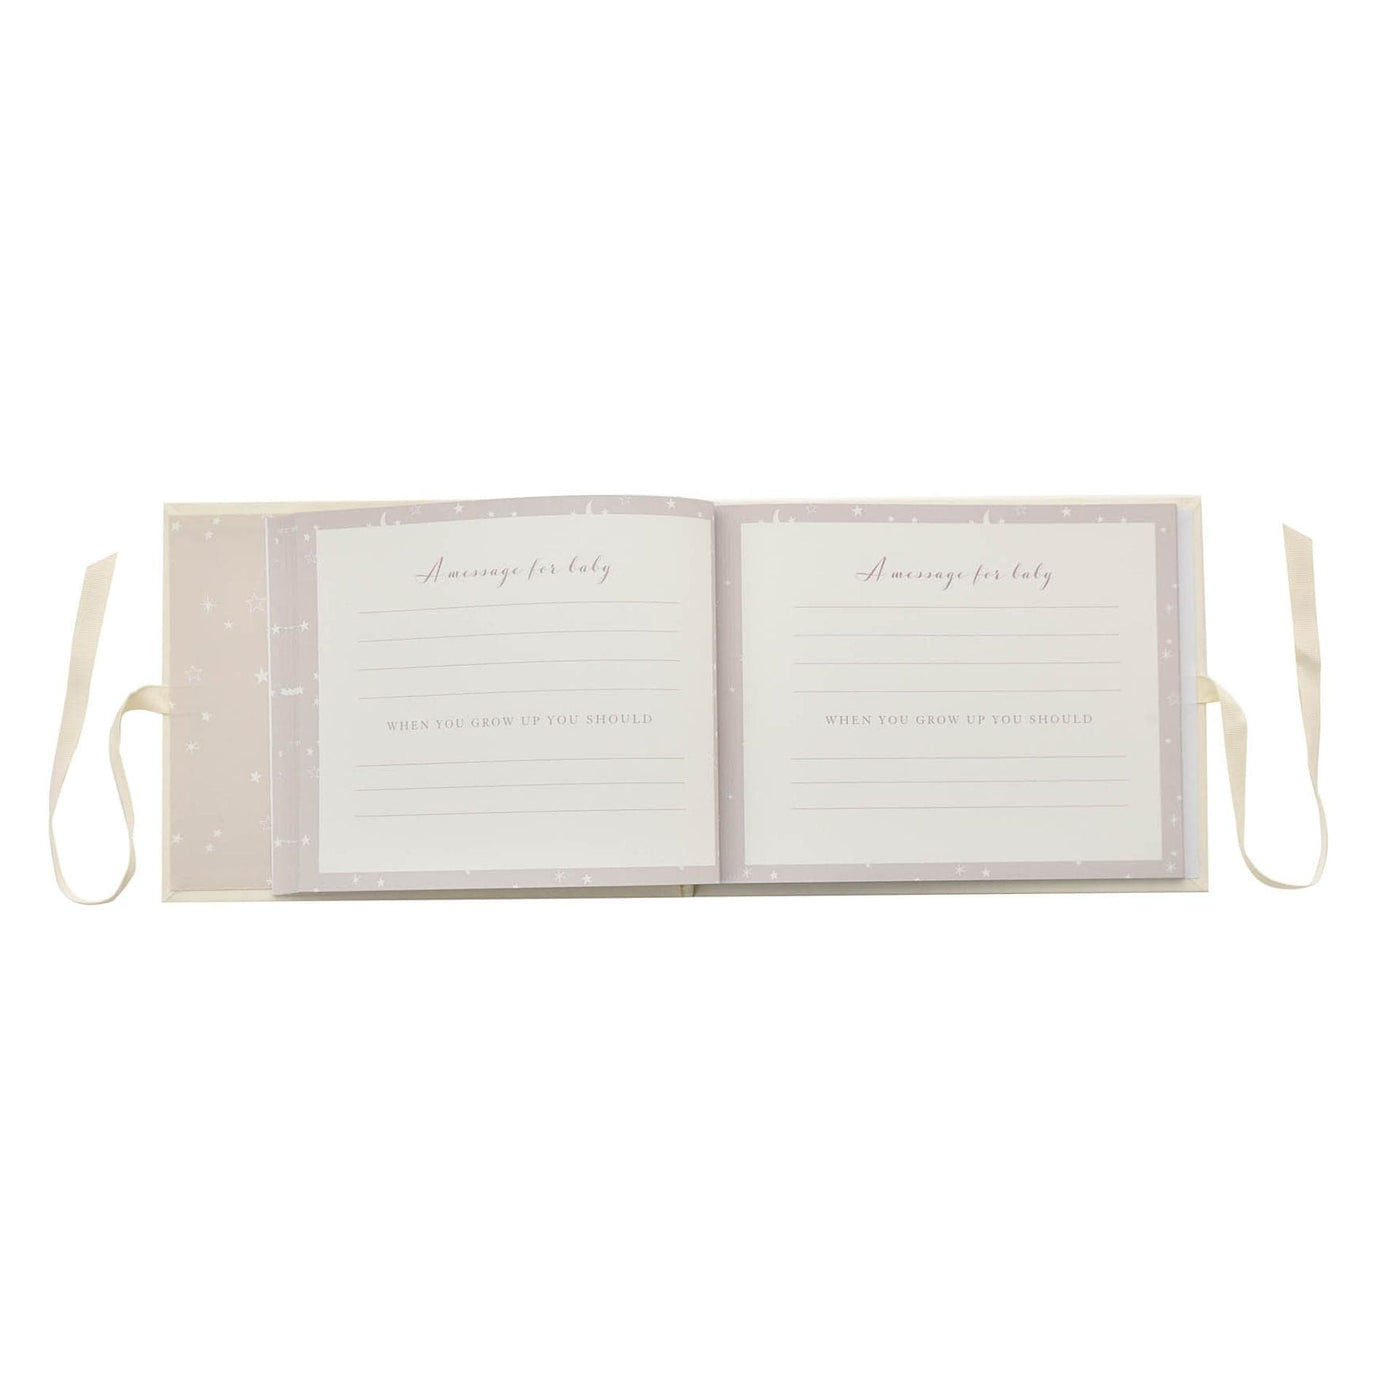 Widdop Gifts Guest Books Bambino Guest Book for Baby Showers